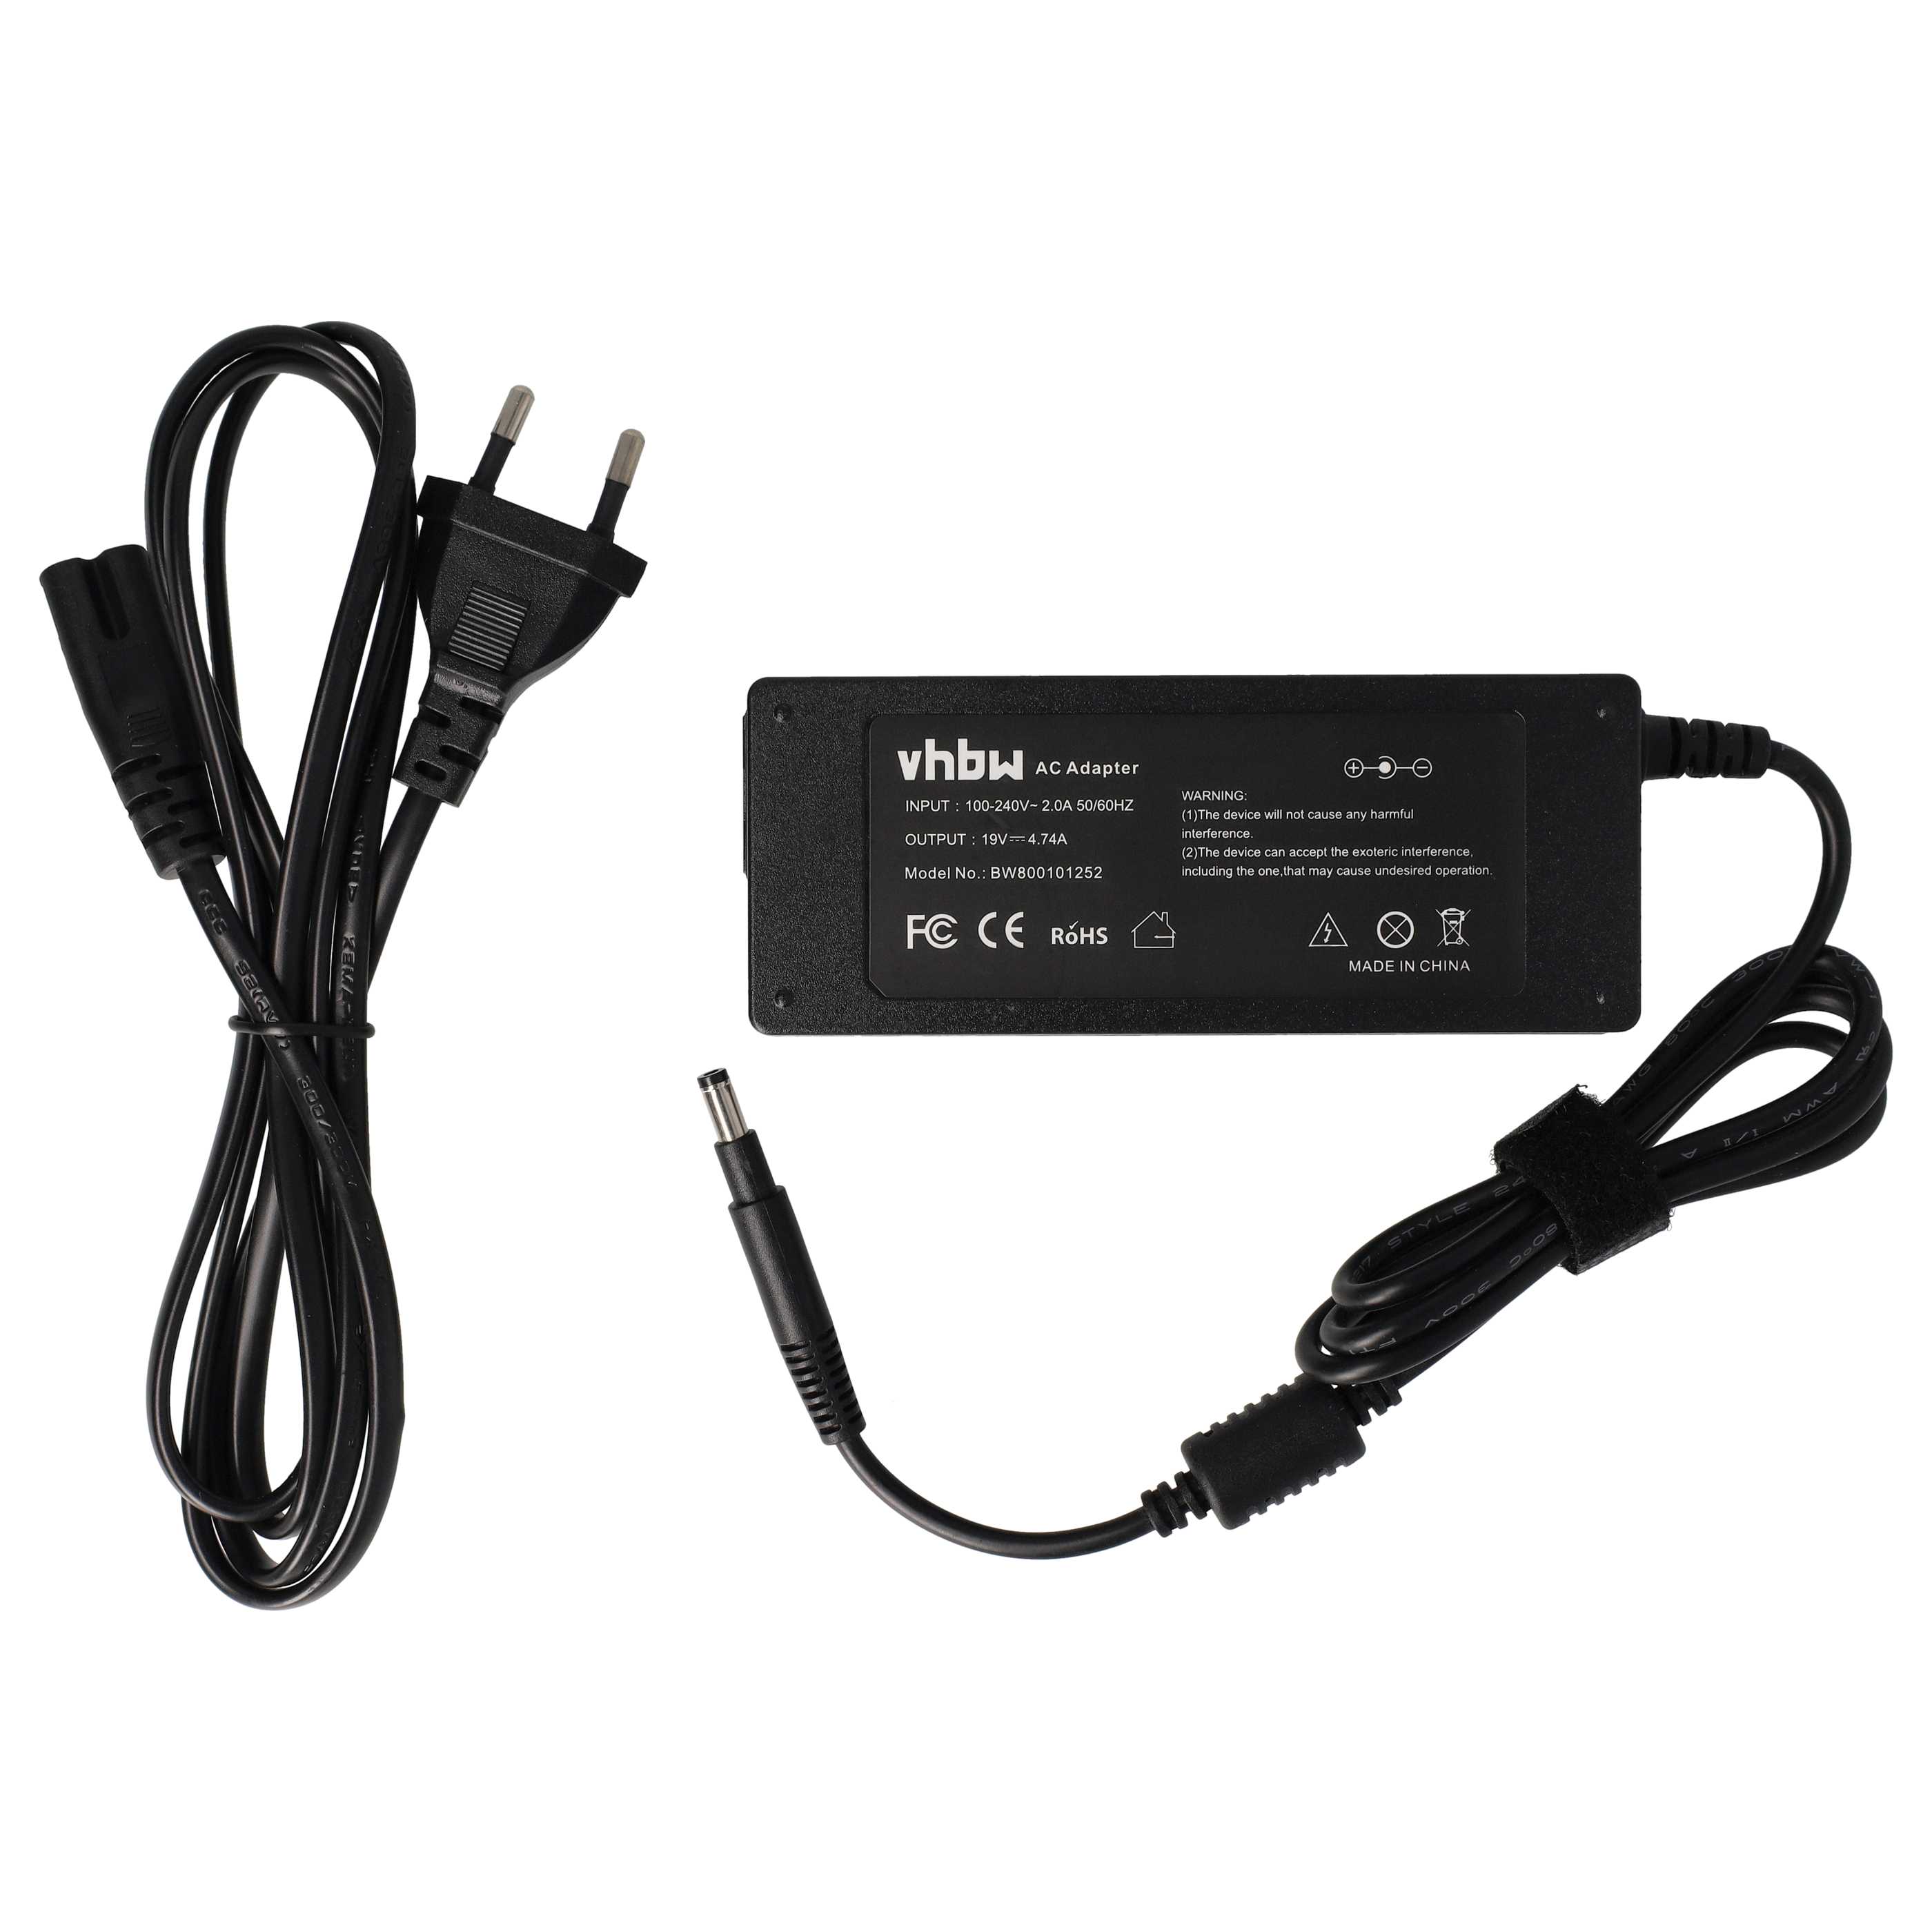 Mains Power Adapter replaces HP 239428-001, 239705-001, 287515-001, 239428-002 for HPNotebook etc., 90 W